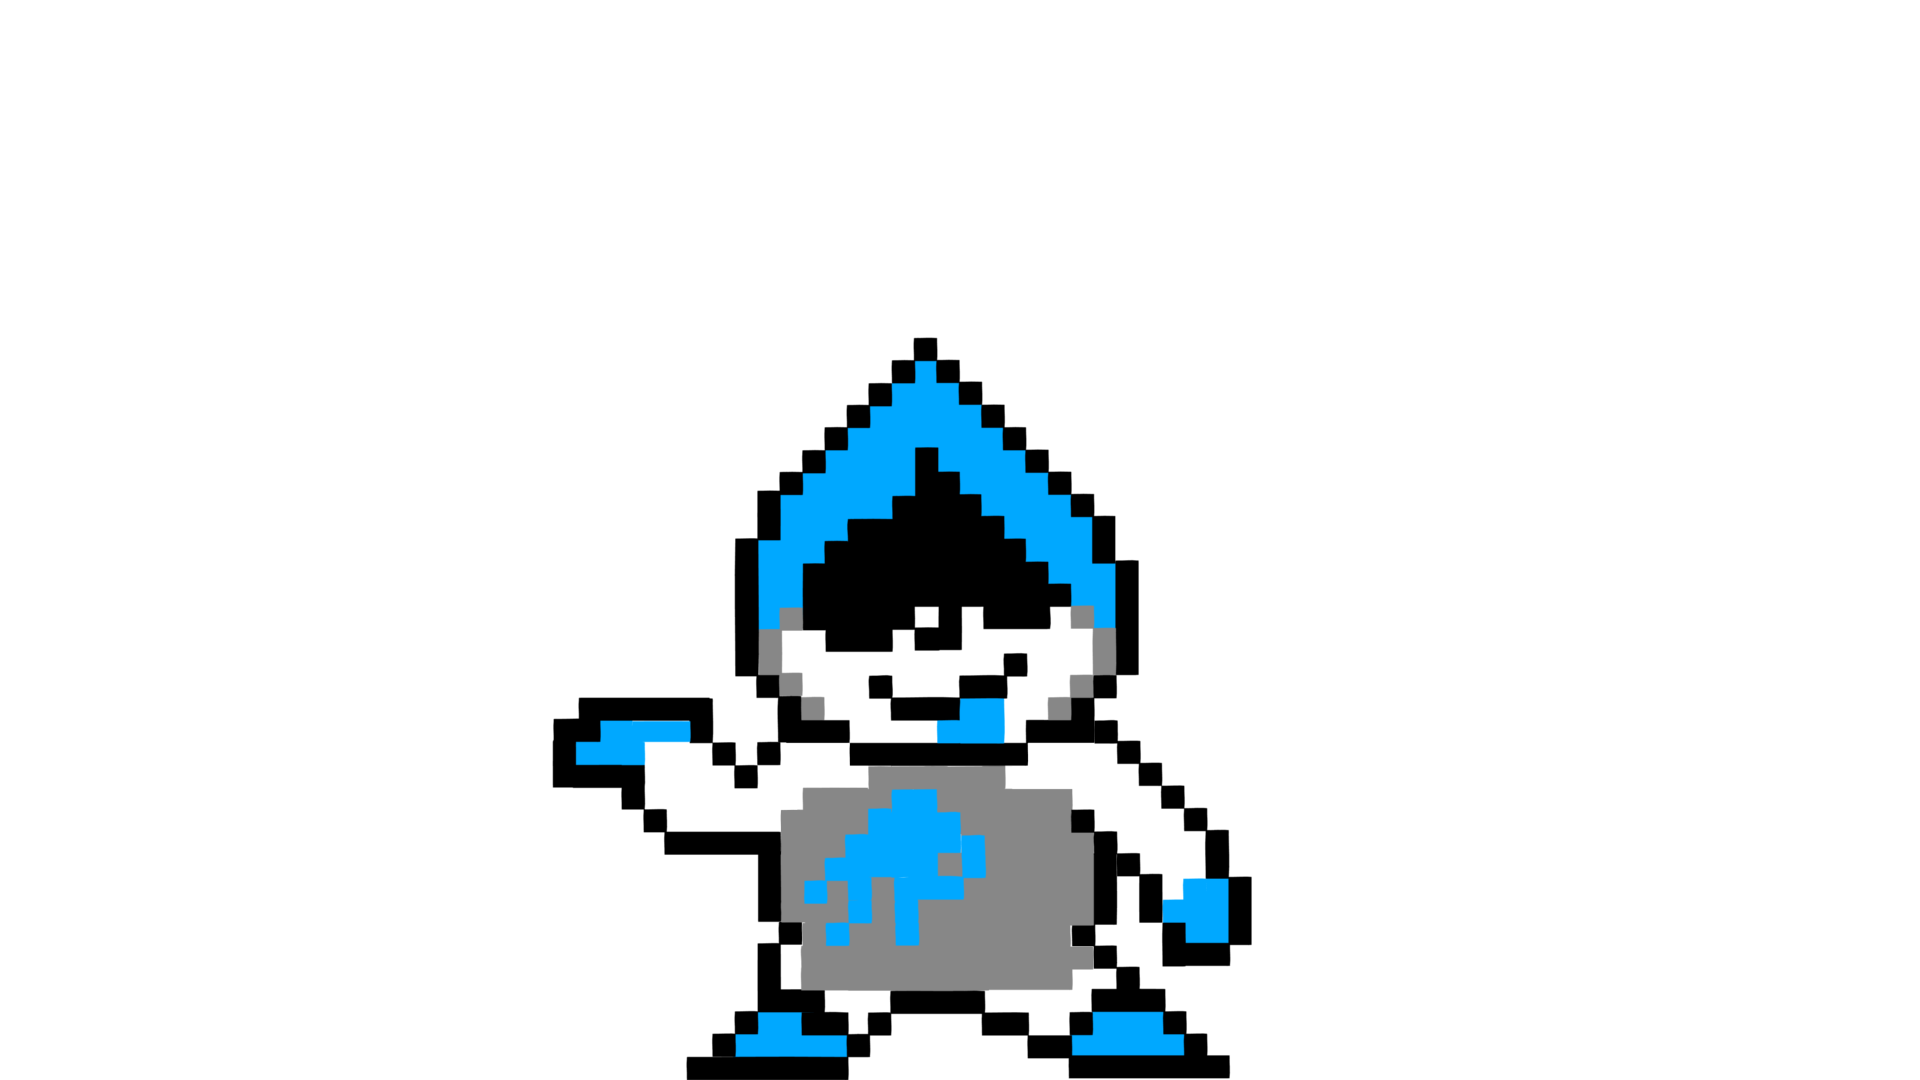 lancer had to do it to 'em